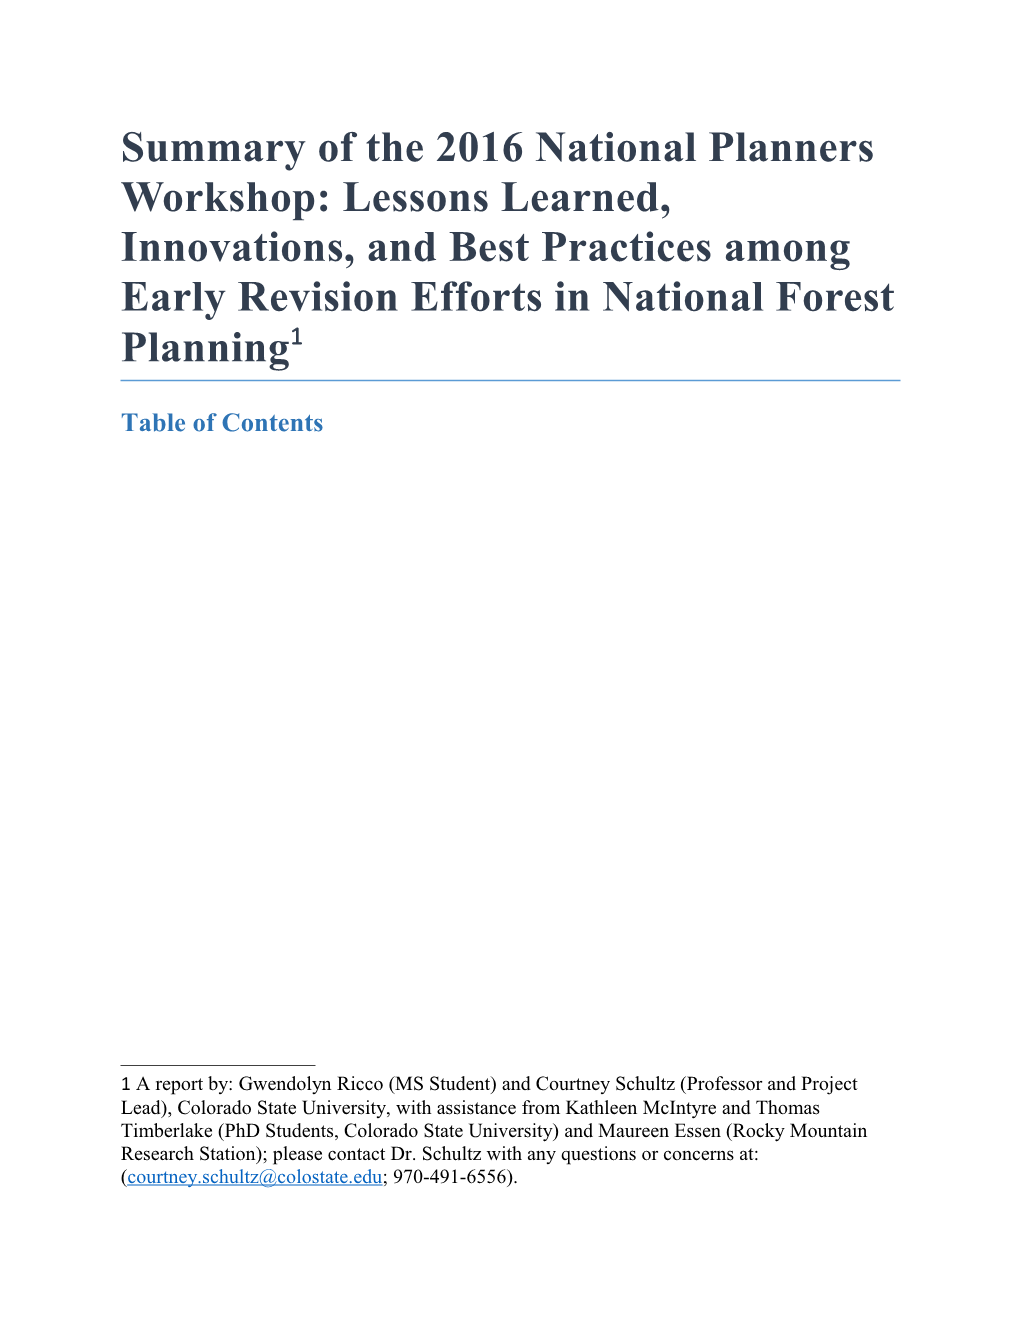 Summary of the 2016 National Planners Workshop: Lessons Learned, Innovations, and Best